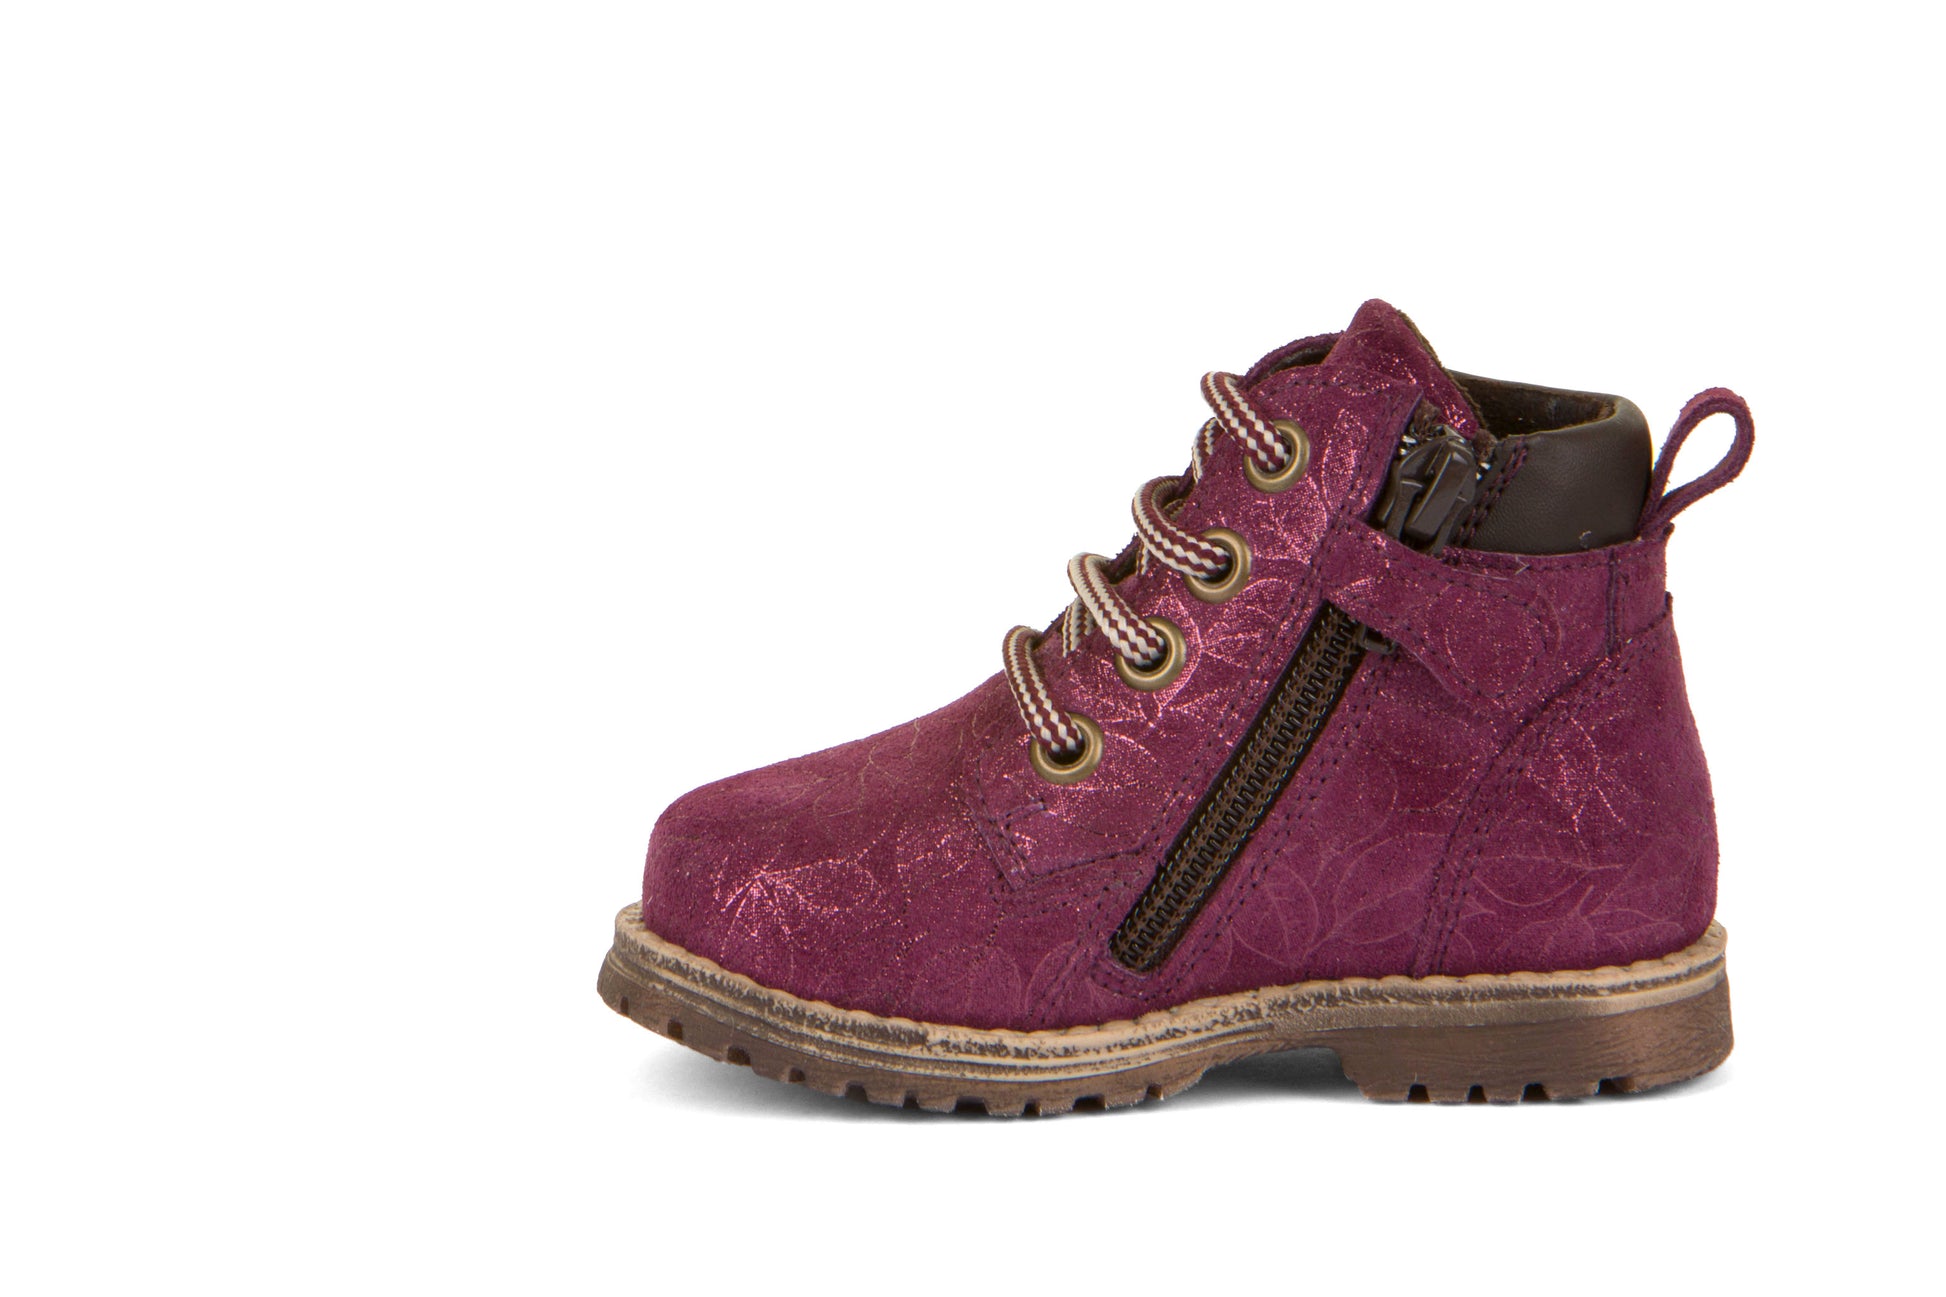 A girls boot by Froddo, style Mono G2110108-8 in Purple with lace, zip fastening. Left side view.